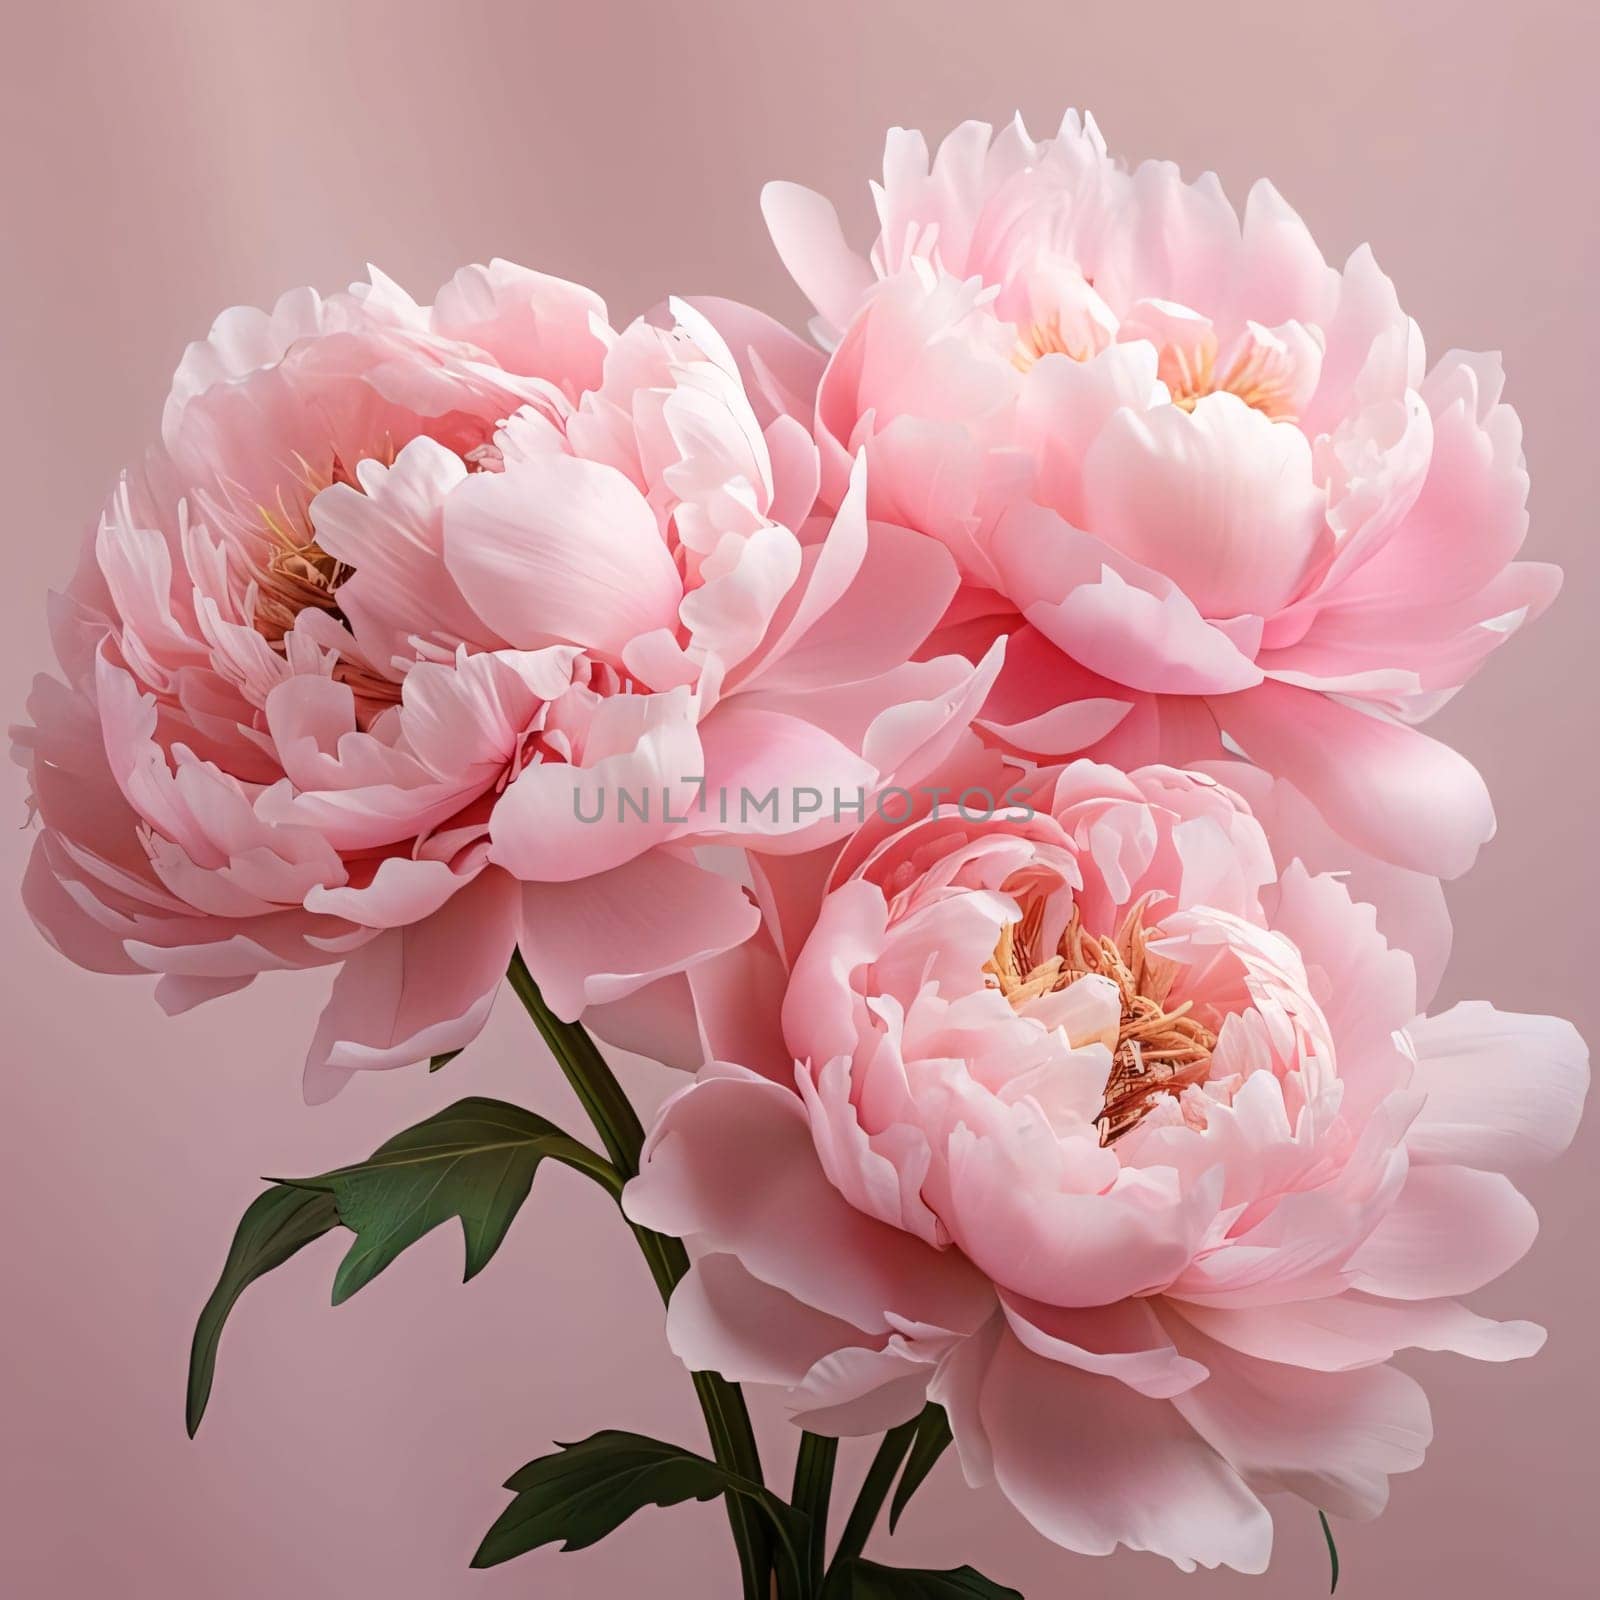 View of peony flowers. Flowering flowers, a symbol of spring, new life. A joyful time of nature waking up to life.